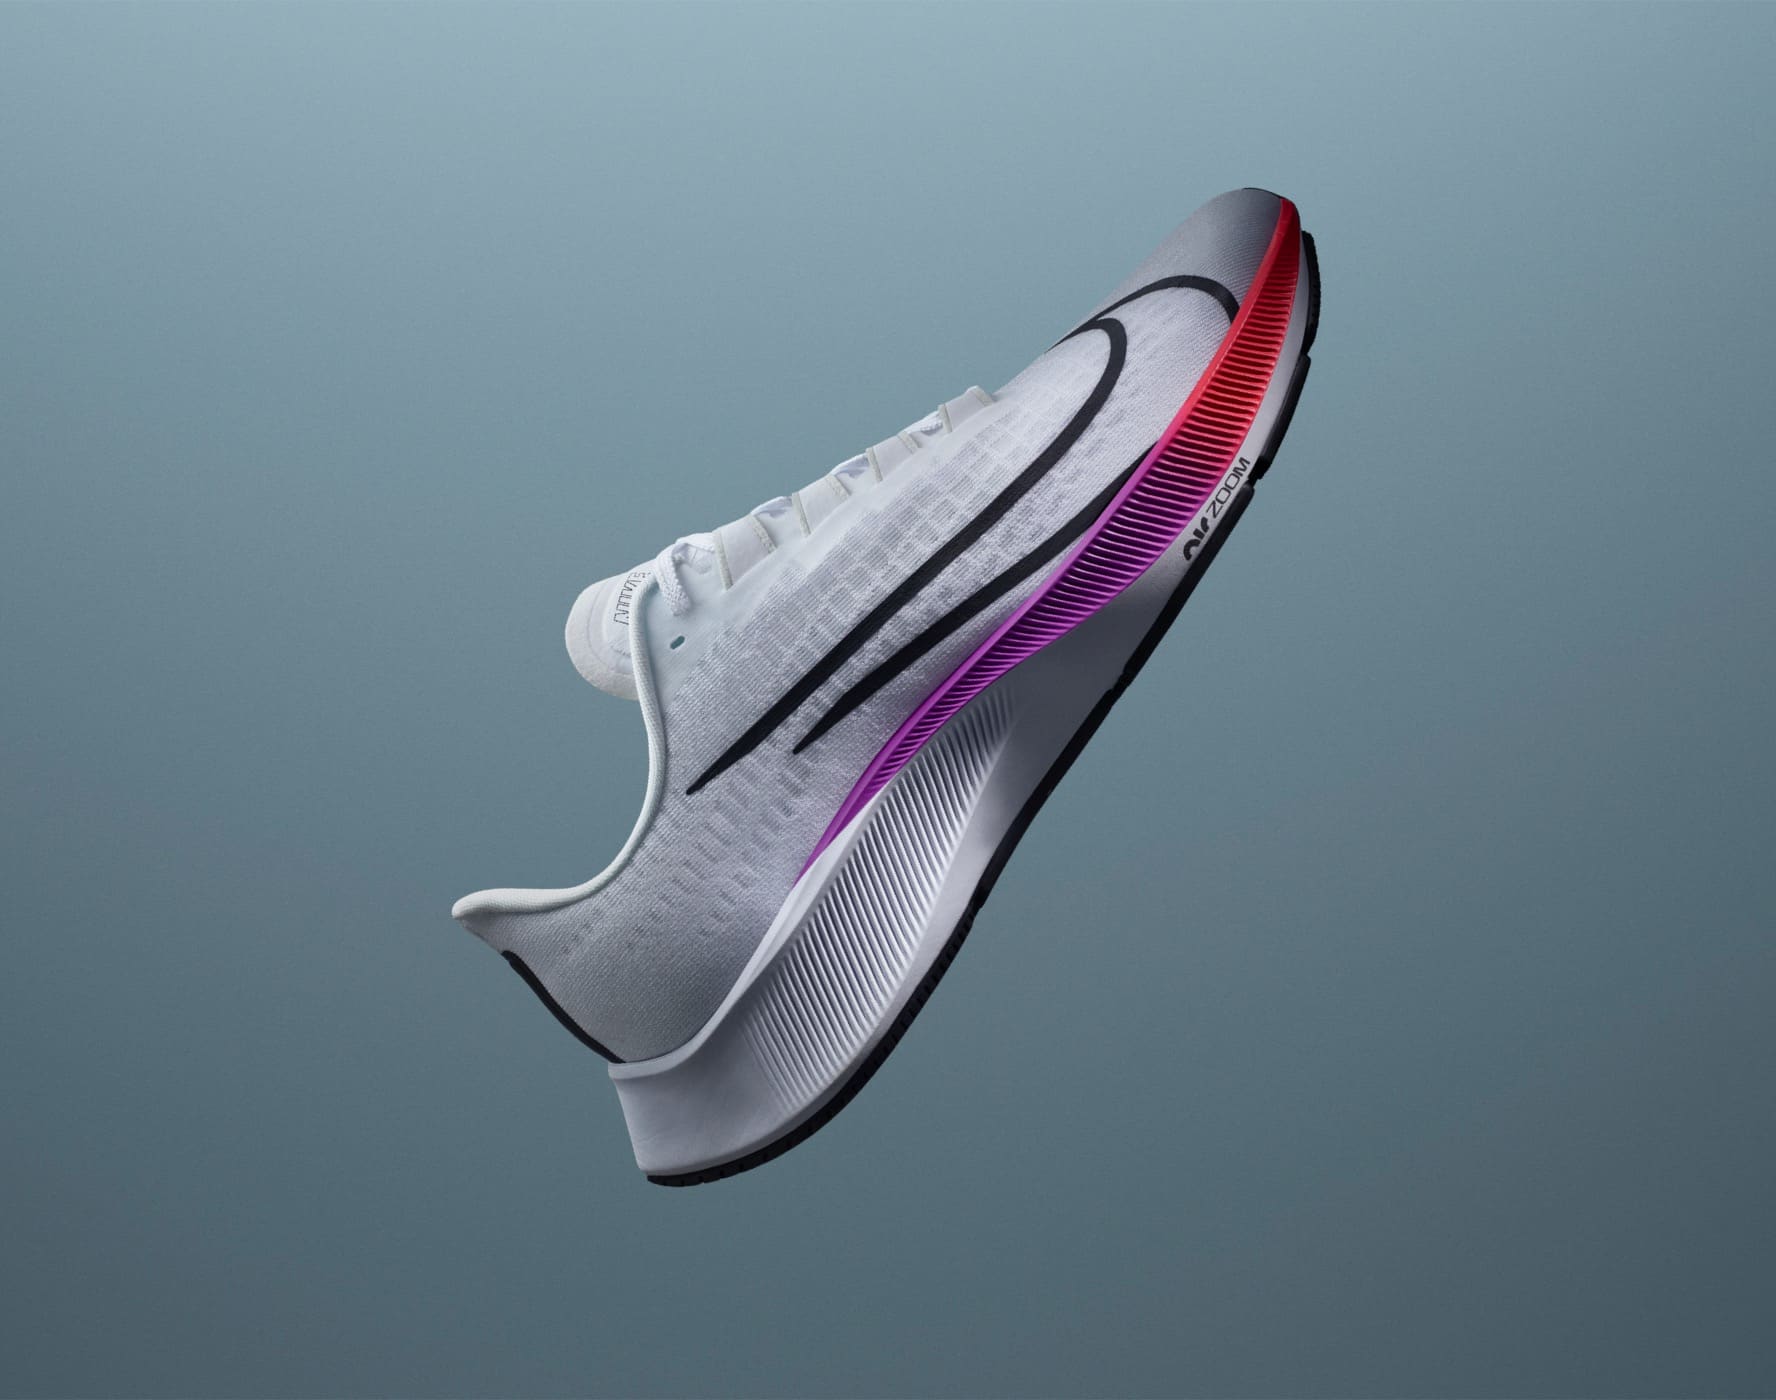 Met name Productiviteit Afm Nike Vaporfly. Featuring the new Vaporfly NEXT%. Nike.com